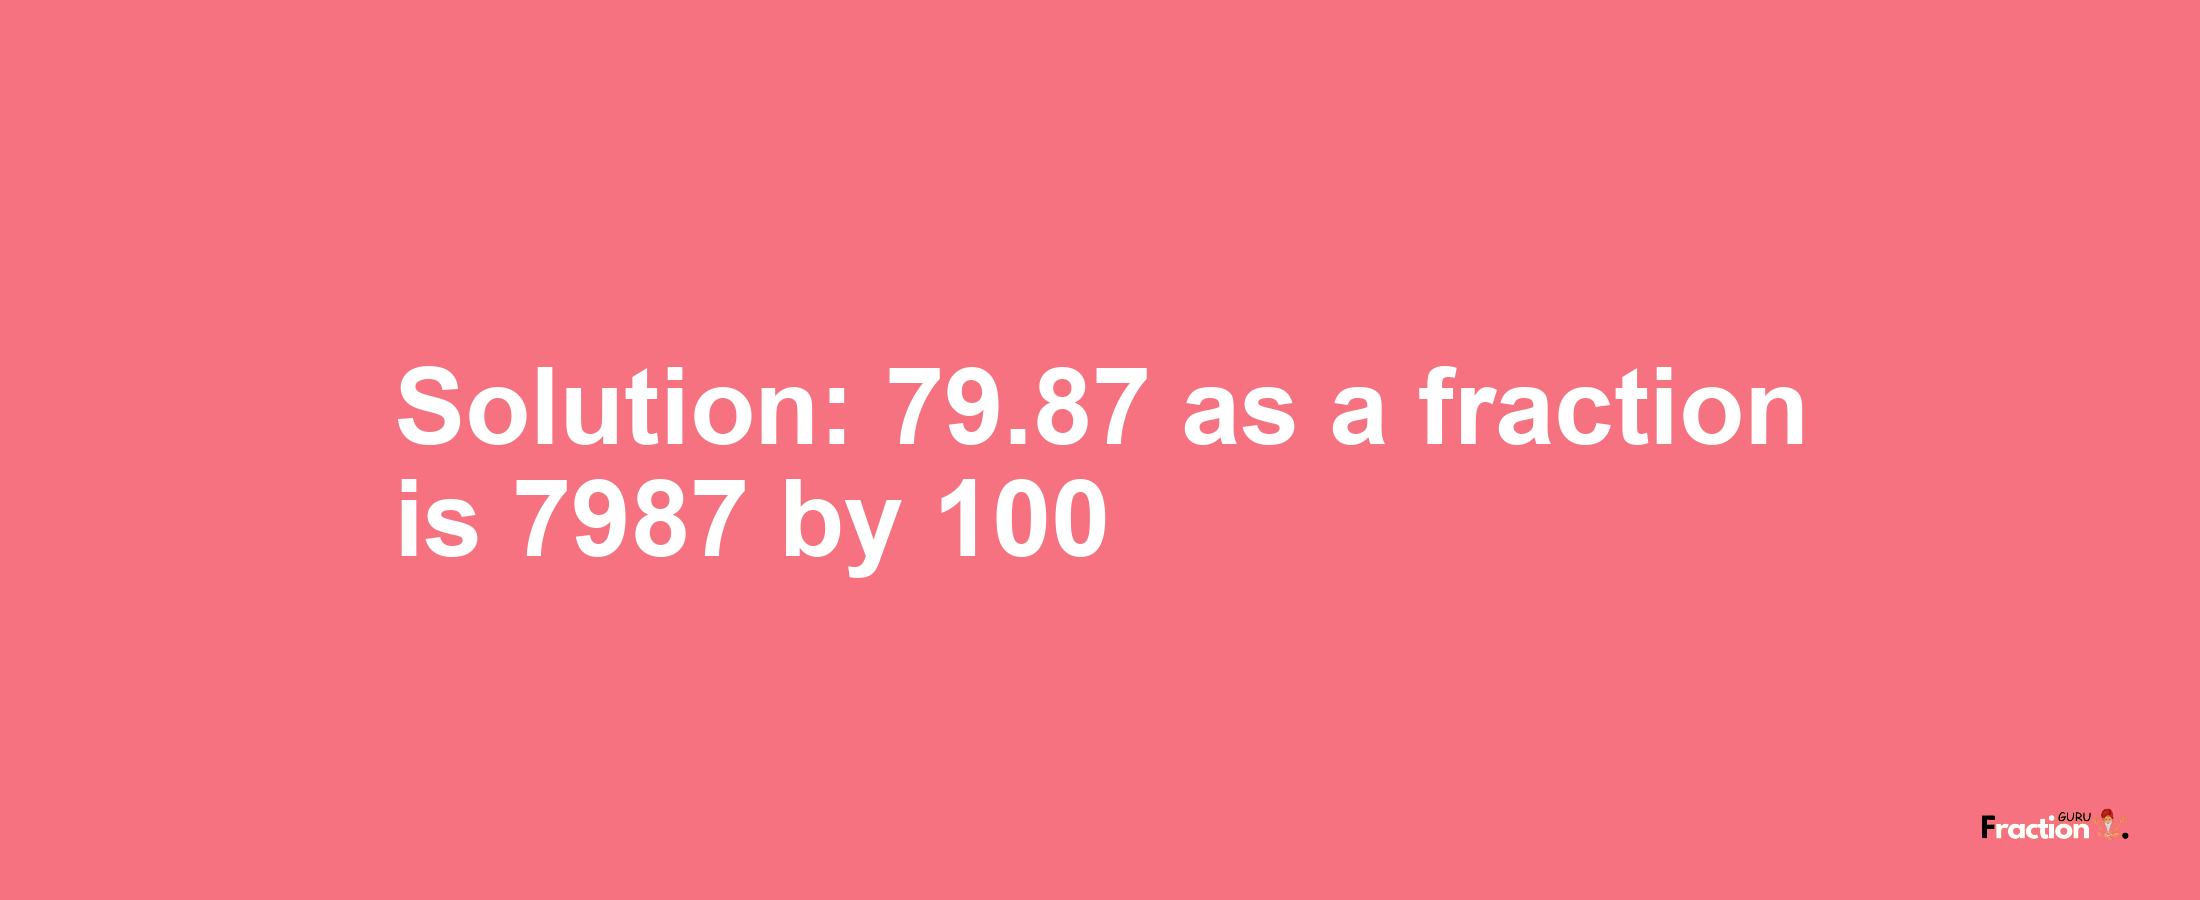 Solution:79.87 as a fraction is 7987/100